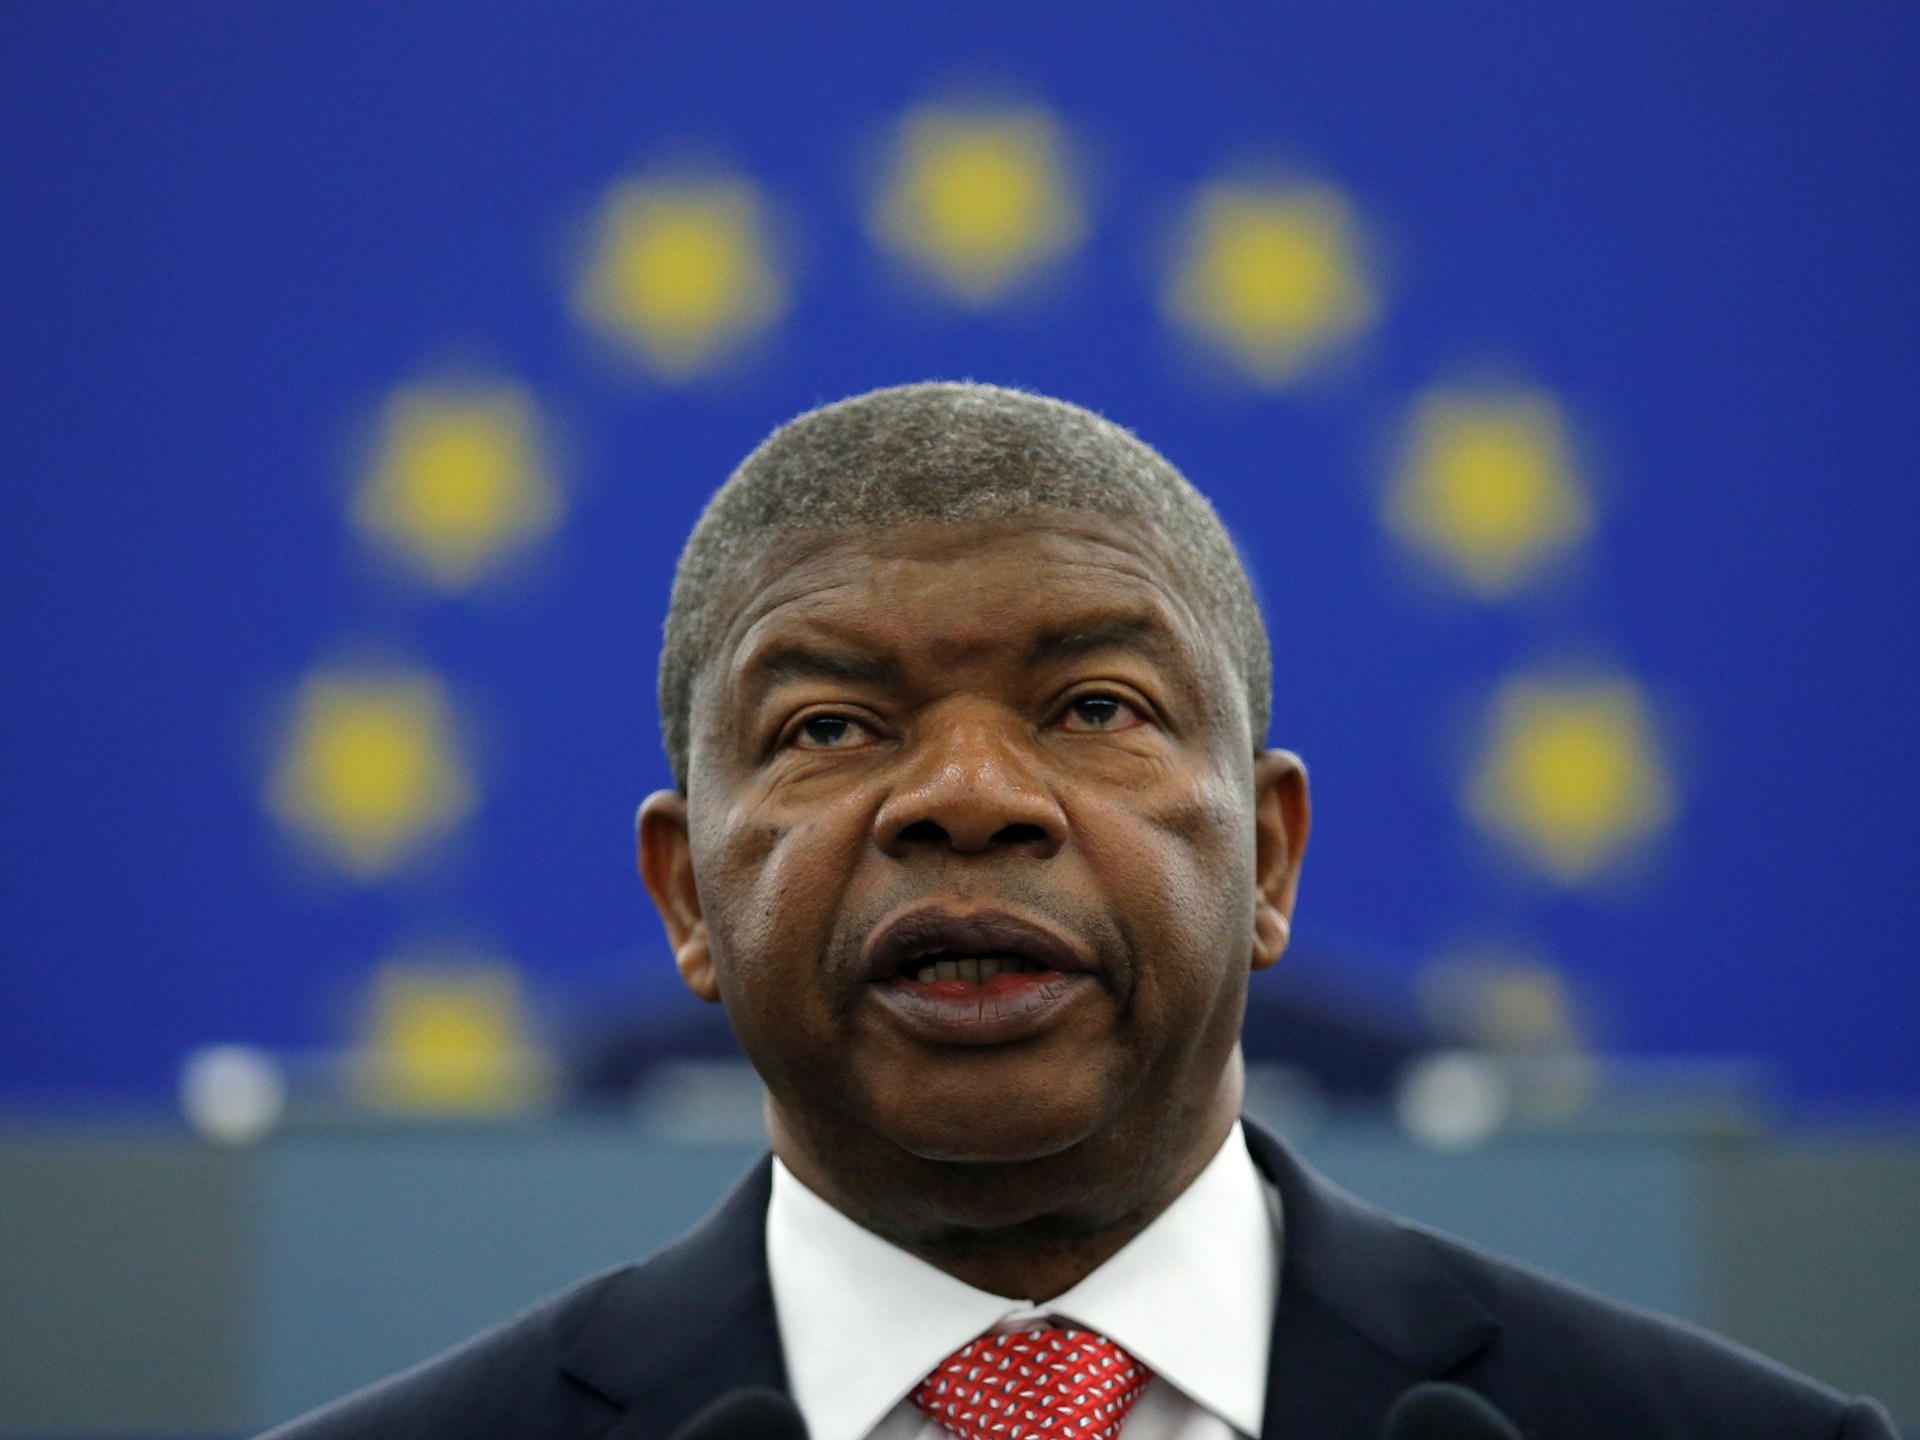 Analysis: Angola’s election race is between continuity and change